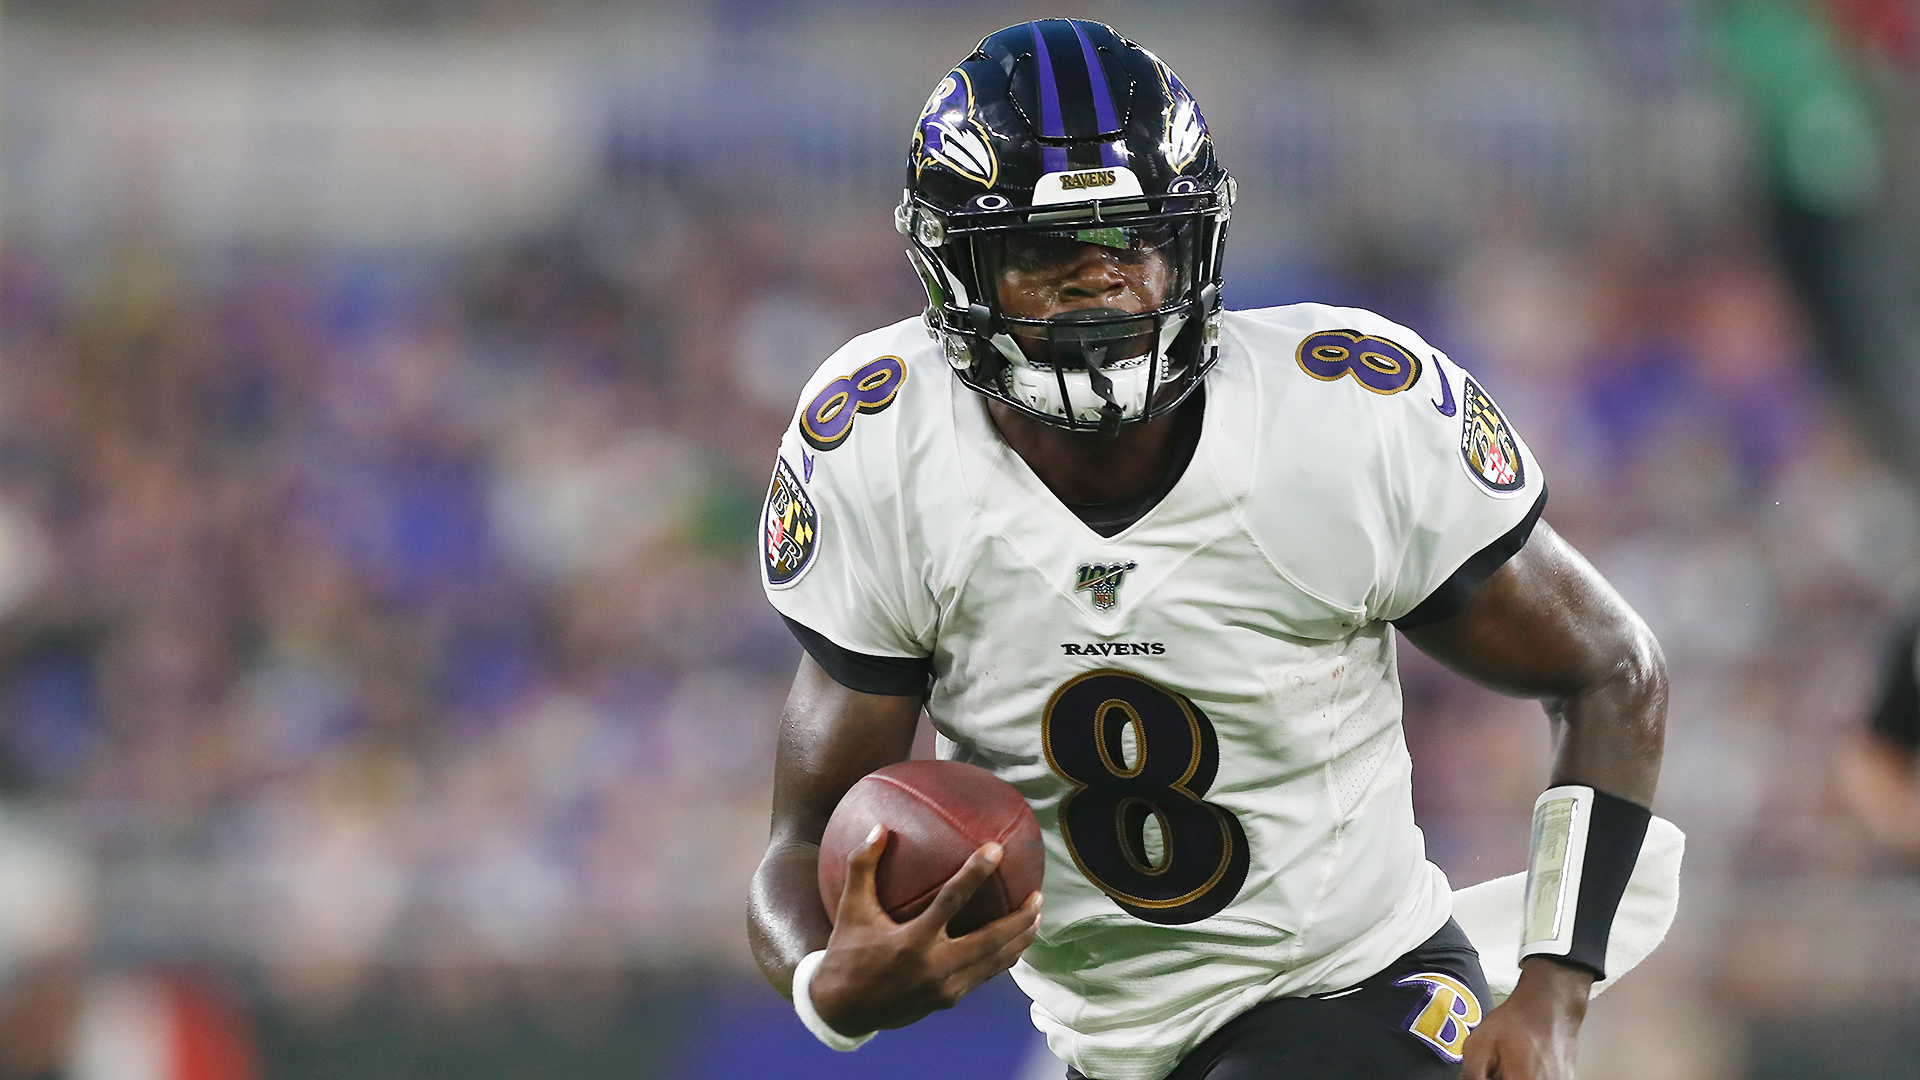 How exactly do the Ravens plan to use Lamar Jackson in 2019? | Sporting News